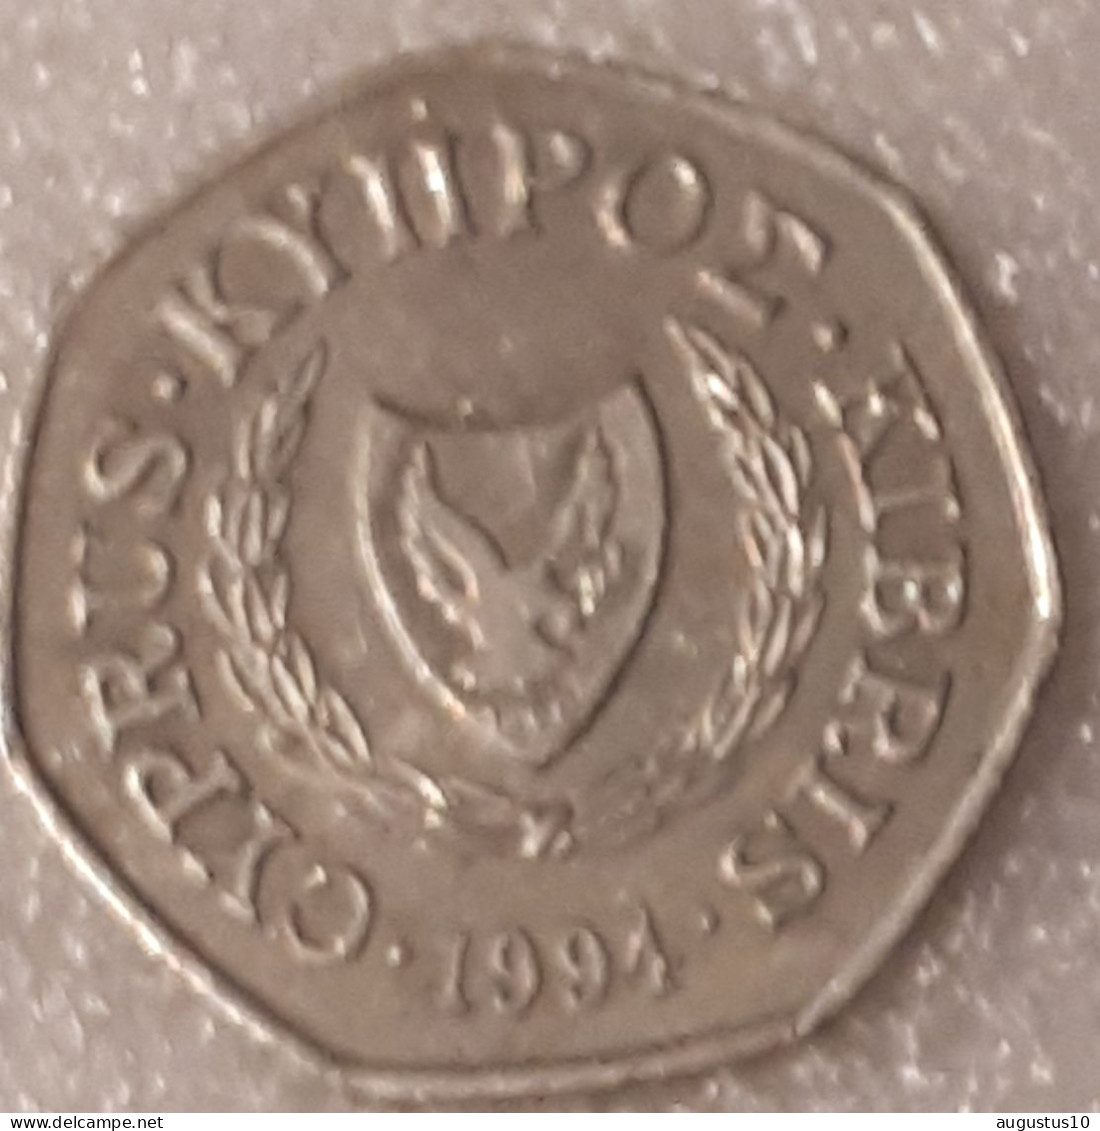 CYPRUS: 50 CENTS 1994 Km 66 Alm/UNC LOW MINTAGE Only 300.000 - Cyprus